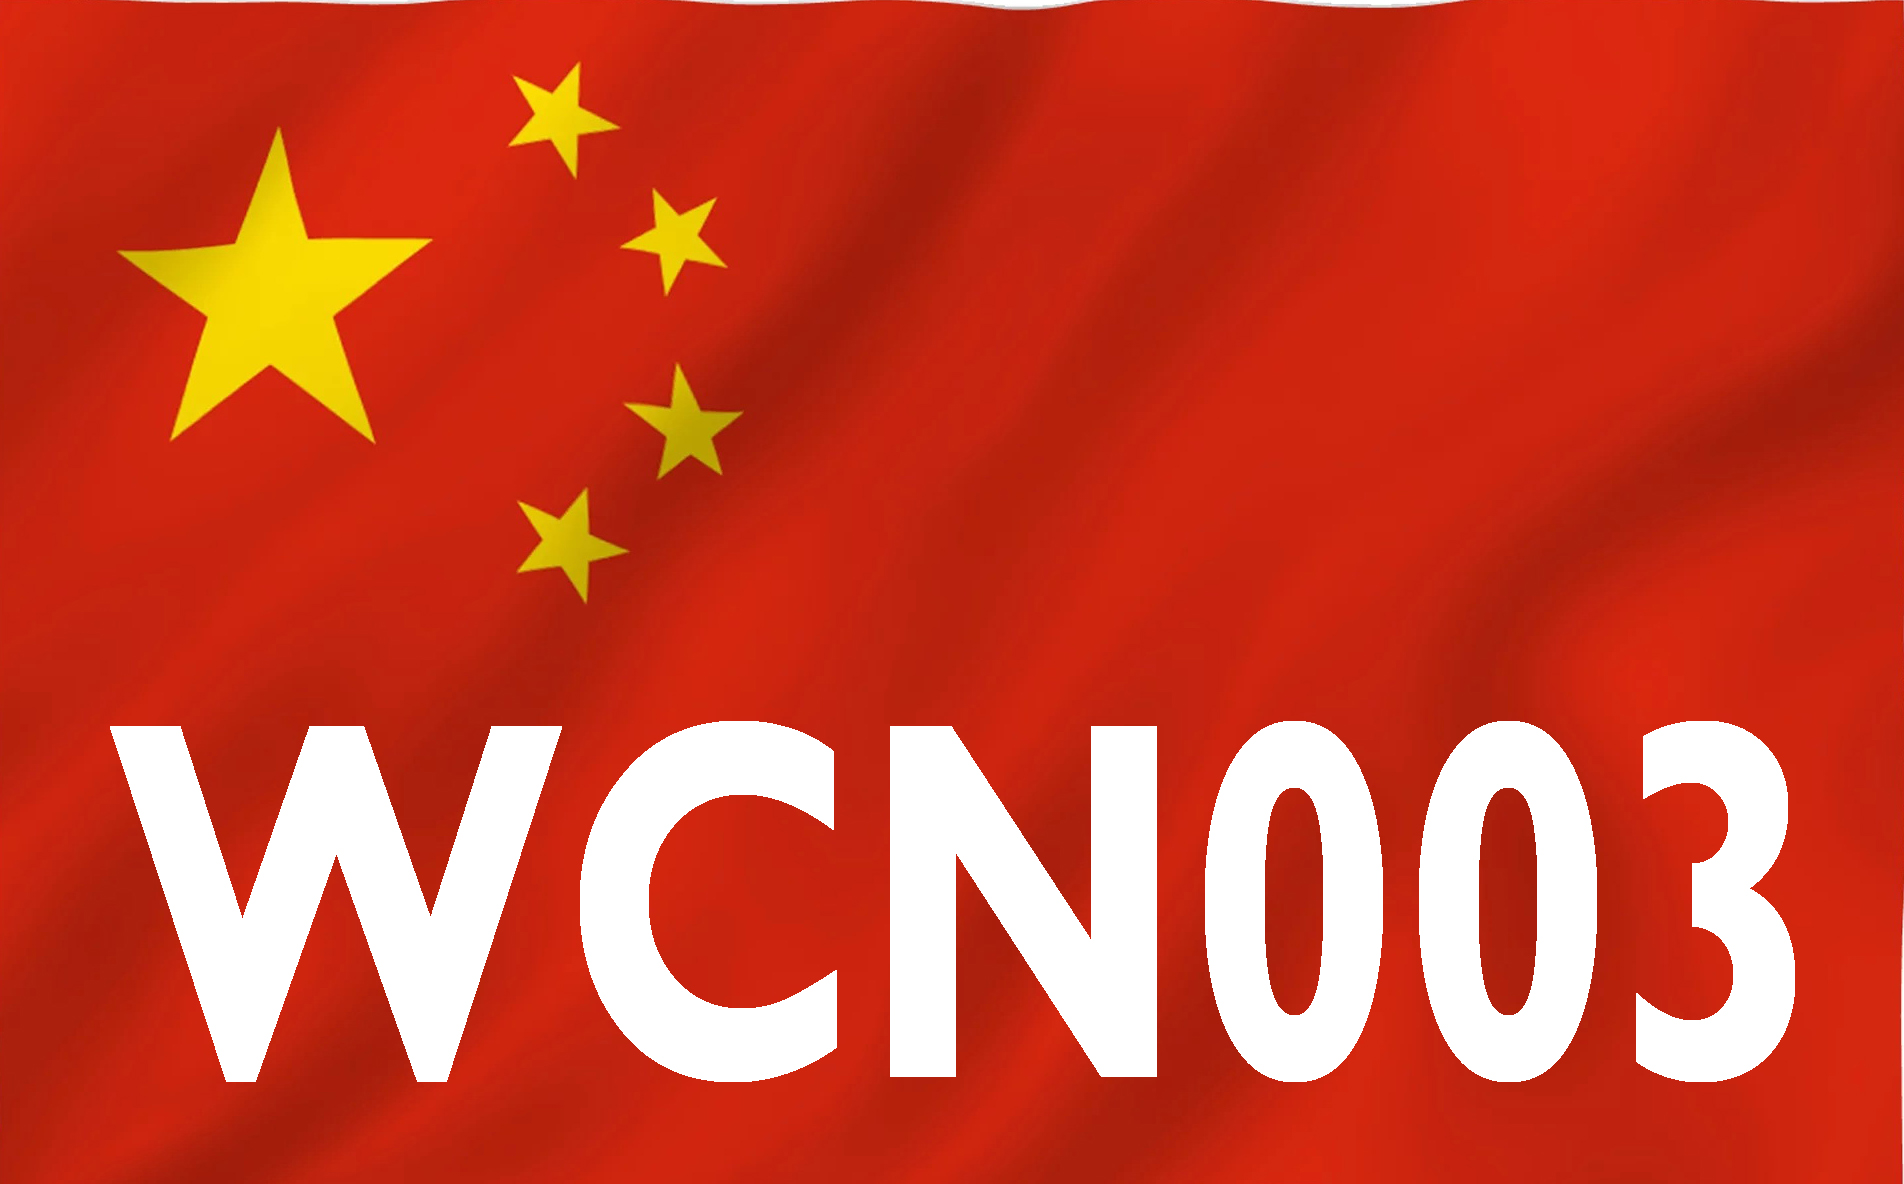 WCN003